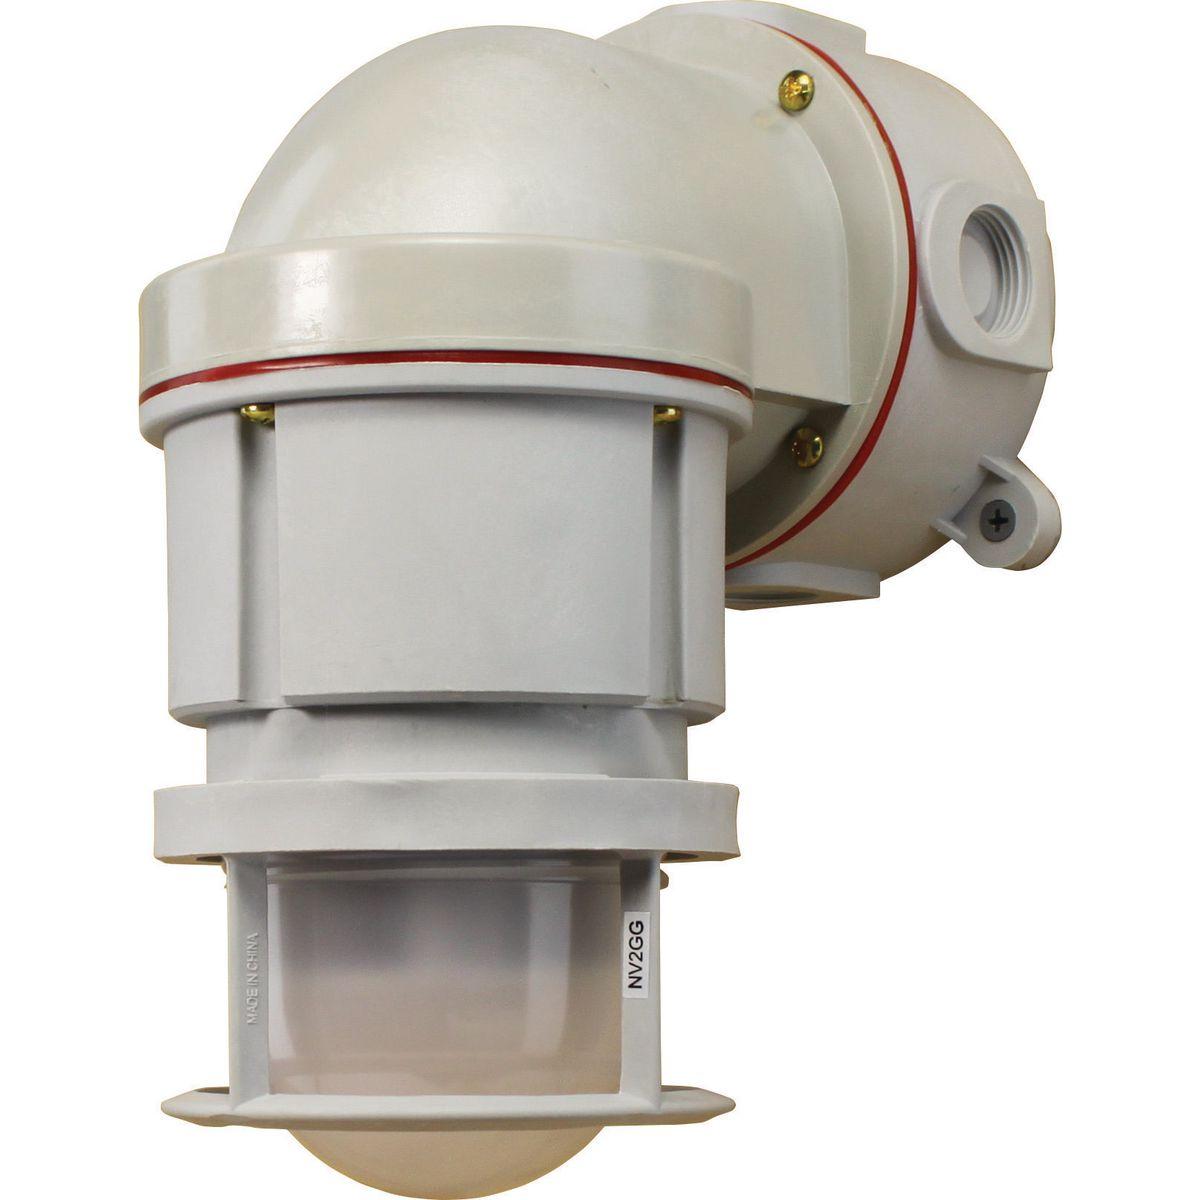 Hubbell NVL230B2G NVL Series Non-Metallic Corrosion Resistant Hazardous Location LED Fixture, 3/4" Wall Bracket With Guard  ; Energy and labor-saving LED ; High Efﬁcacy (lumens per watt) ; Compact Size ; Type 3, 4, & 4X Rated ; IP66 Marine Rated ; ABS Approved ; Resists co